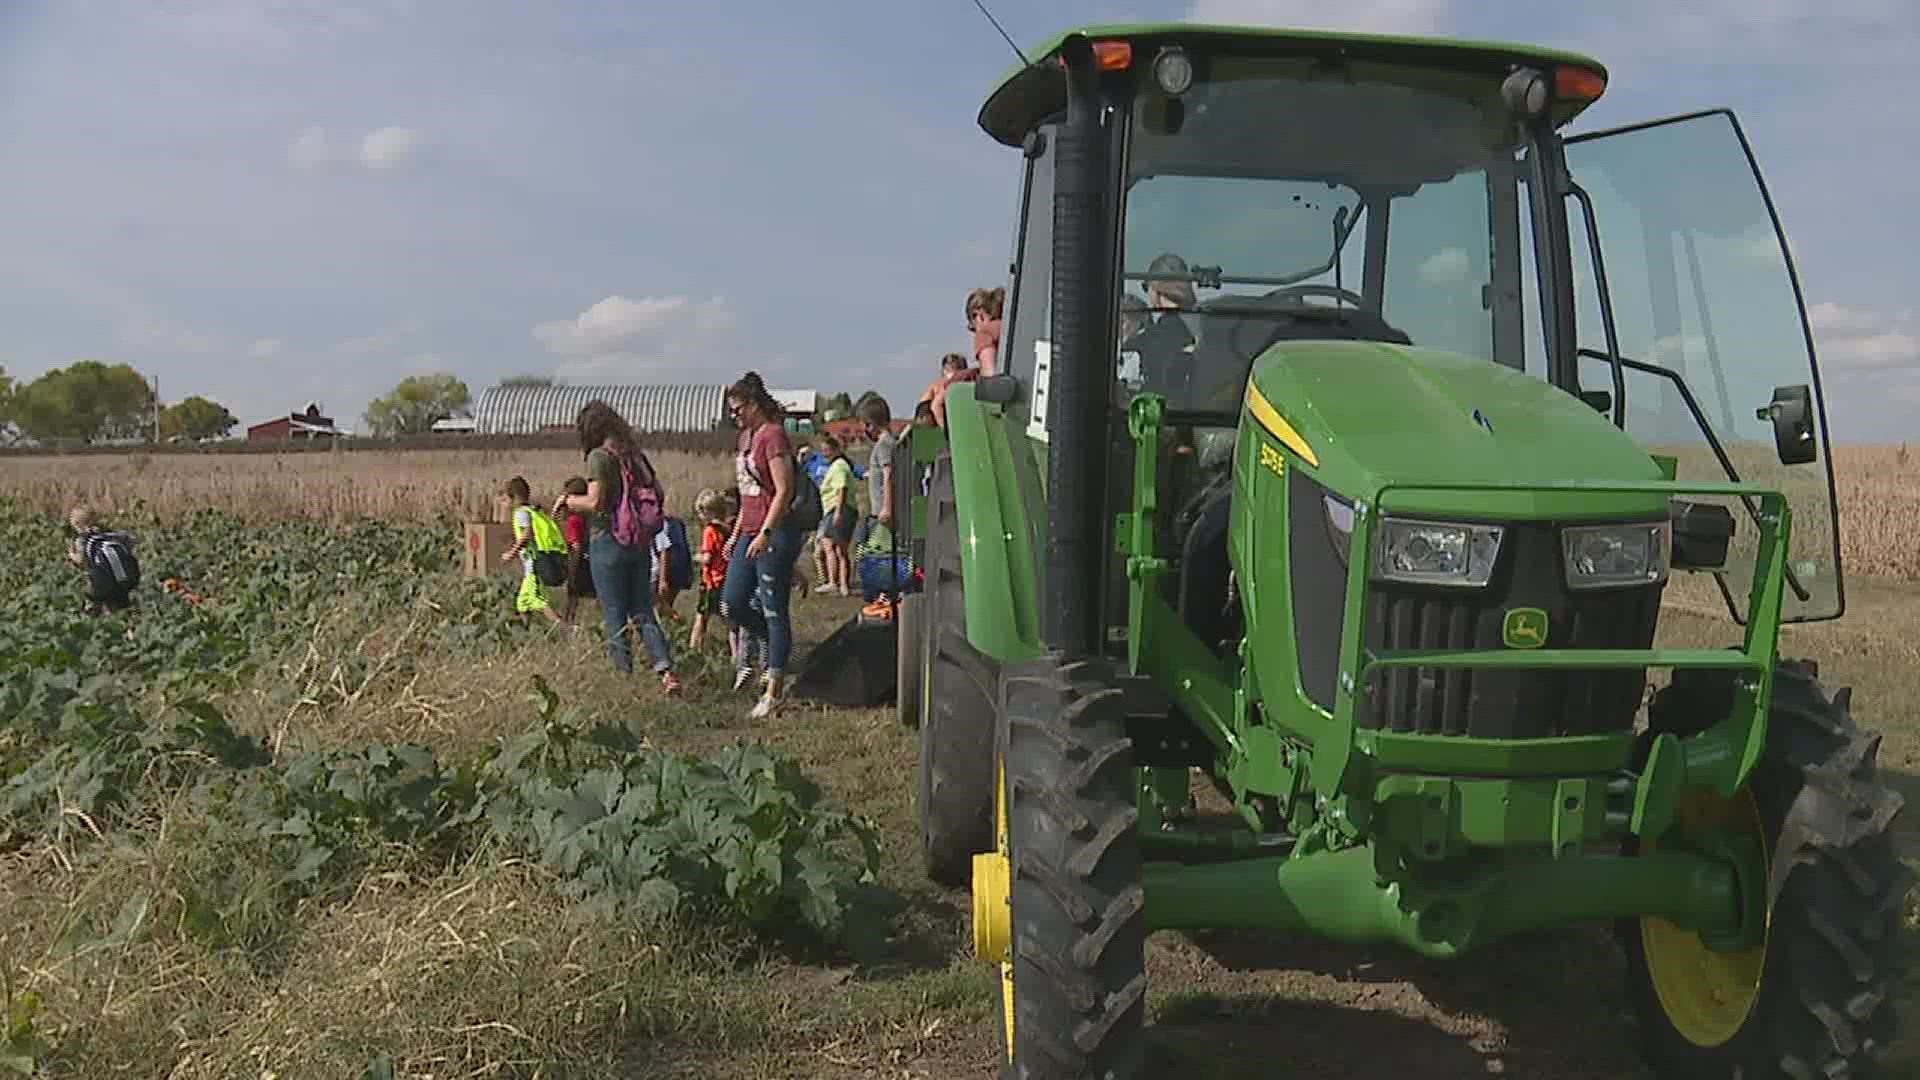 The kindergarten classes at Davenport's McKinley Elementary School visited the farm Friday for a field trip and spent the morning as "pumpkin elves."